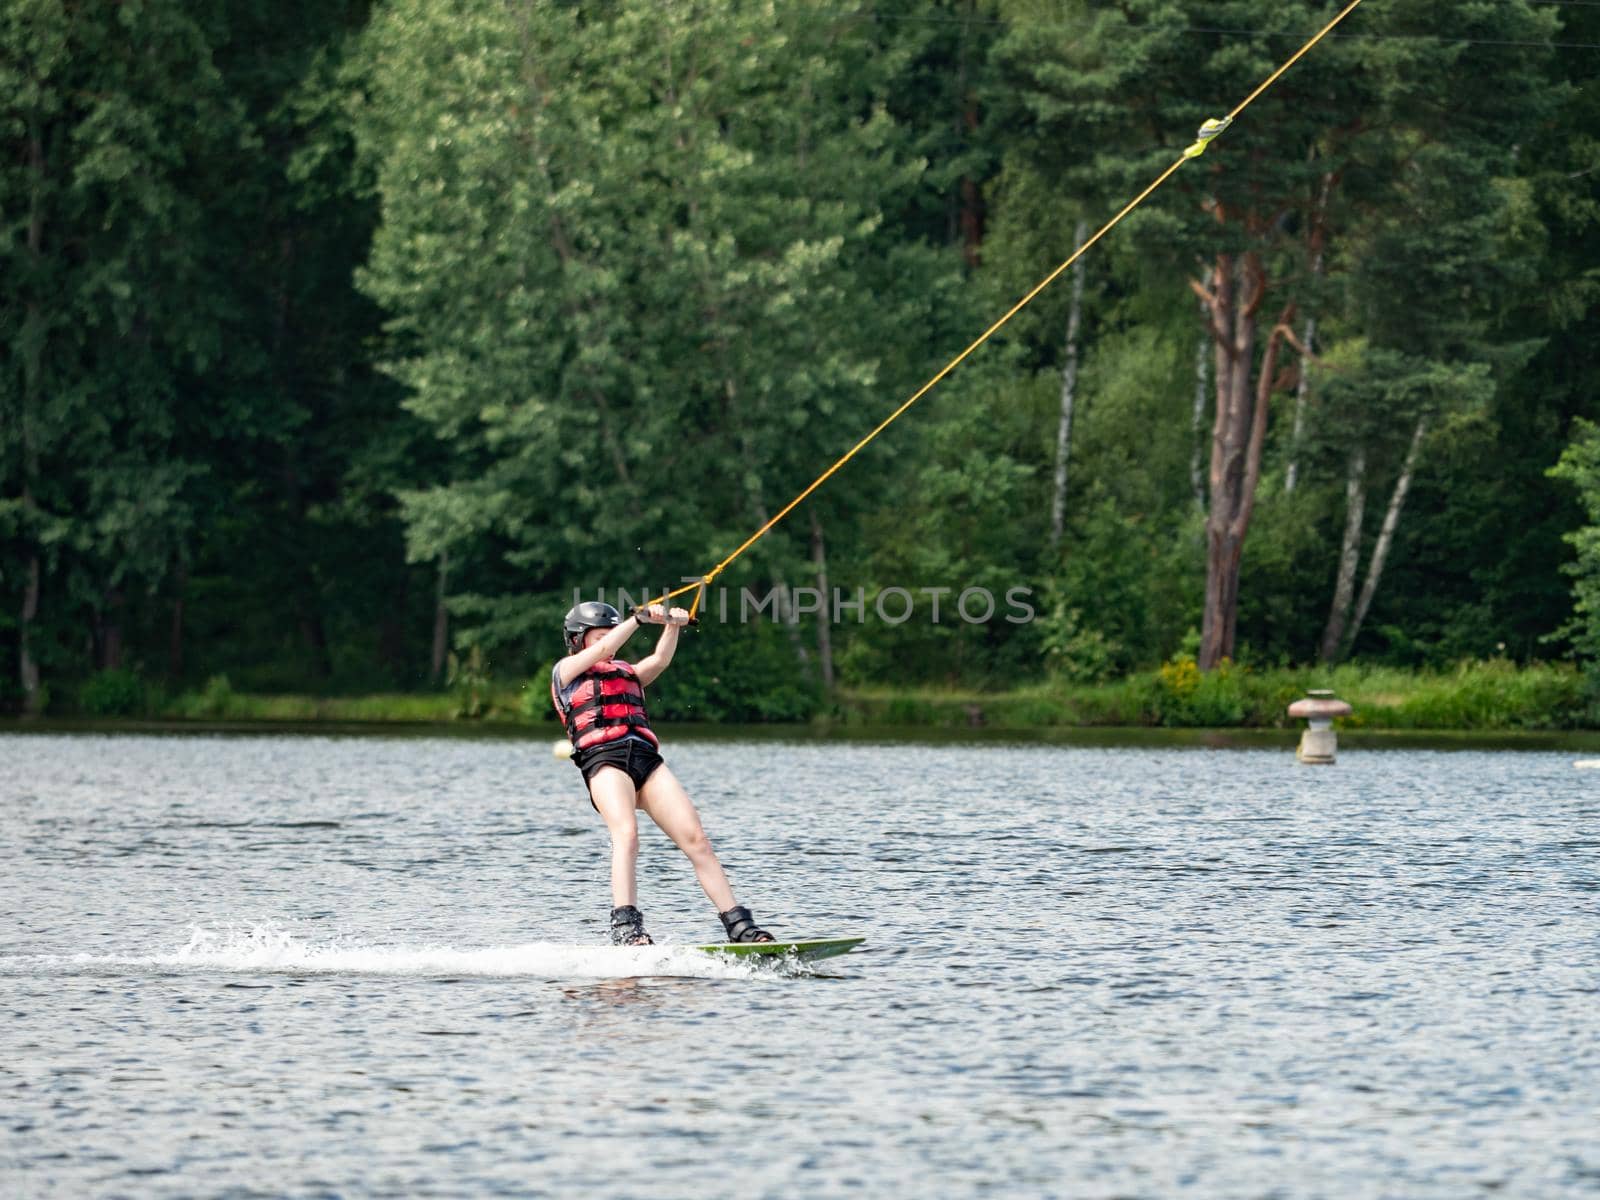 Straz, Czechia. 29th of July, 2021. Wake boarding  boy on lake, the forest in blurry background.
